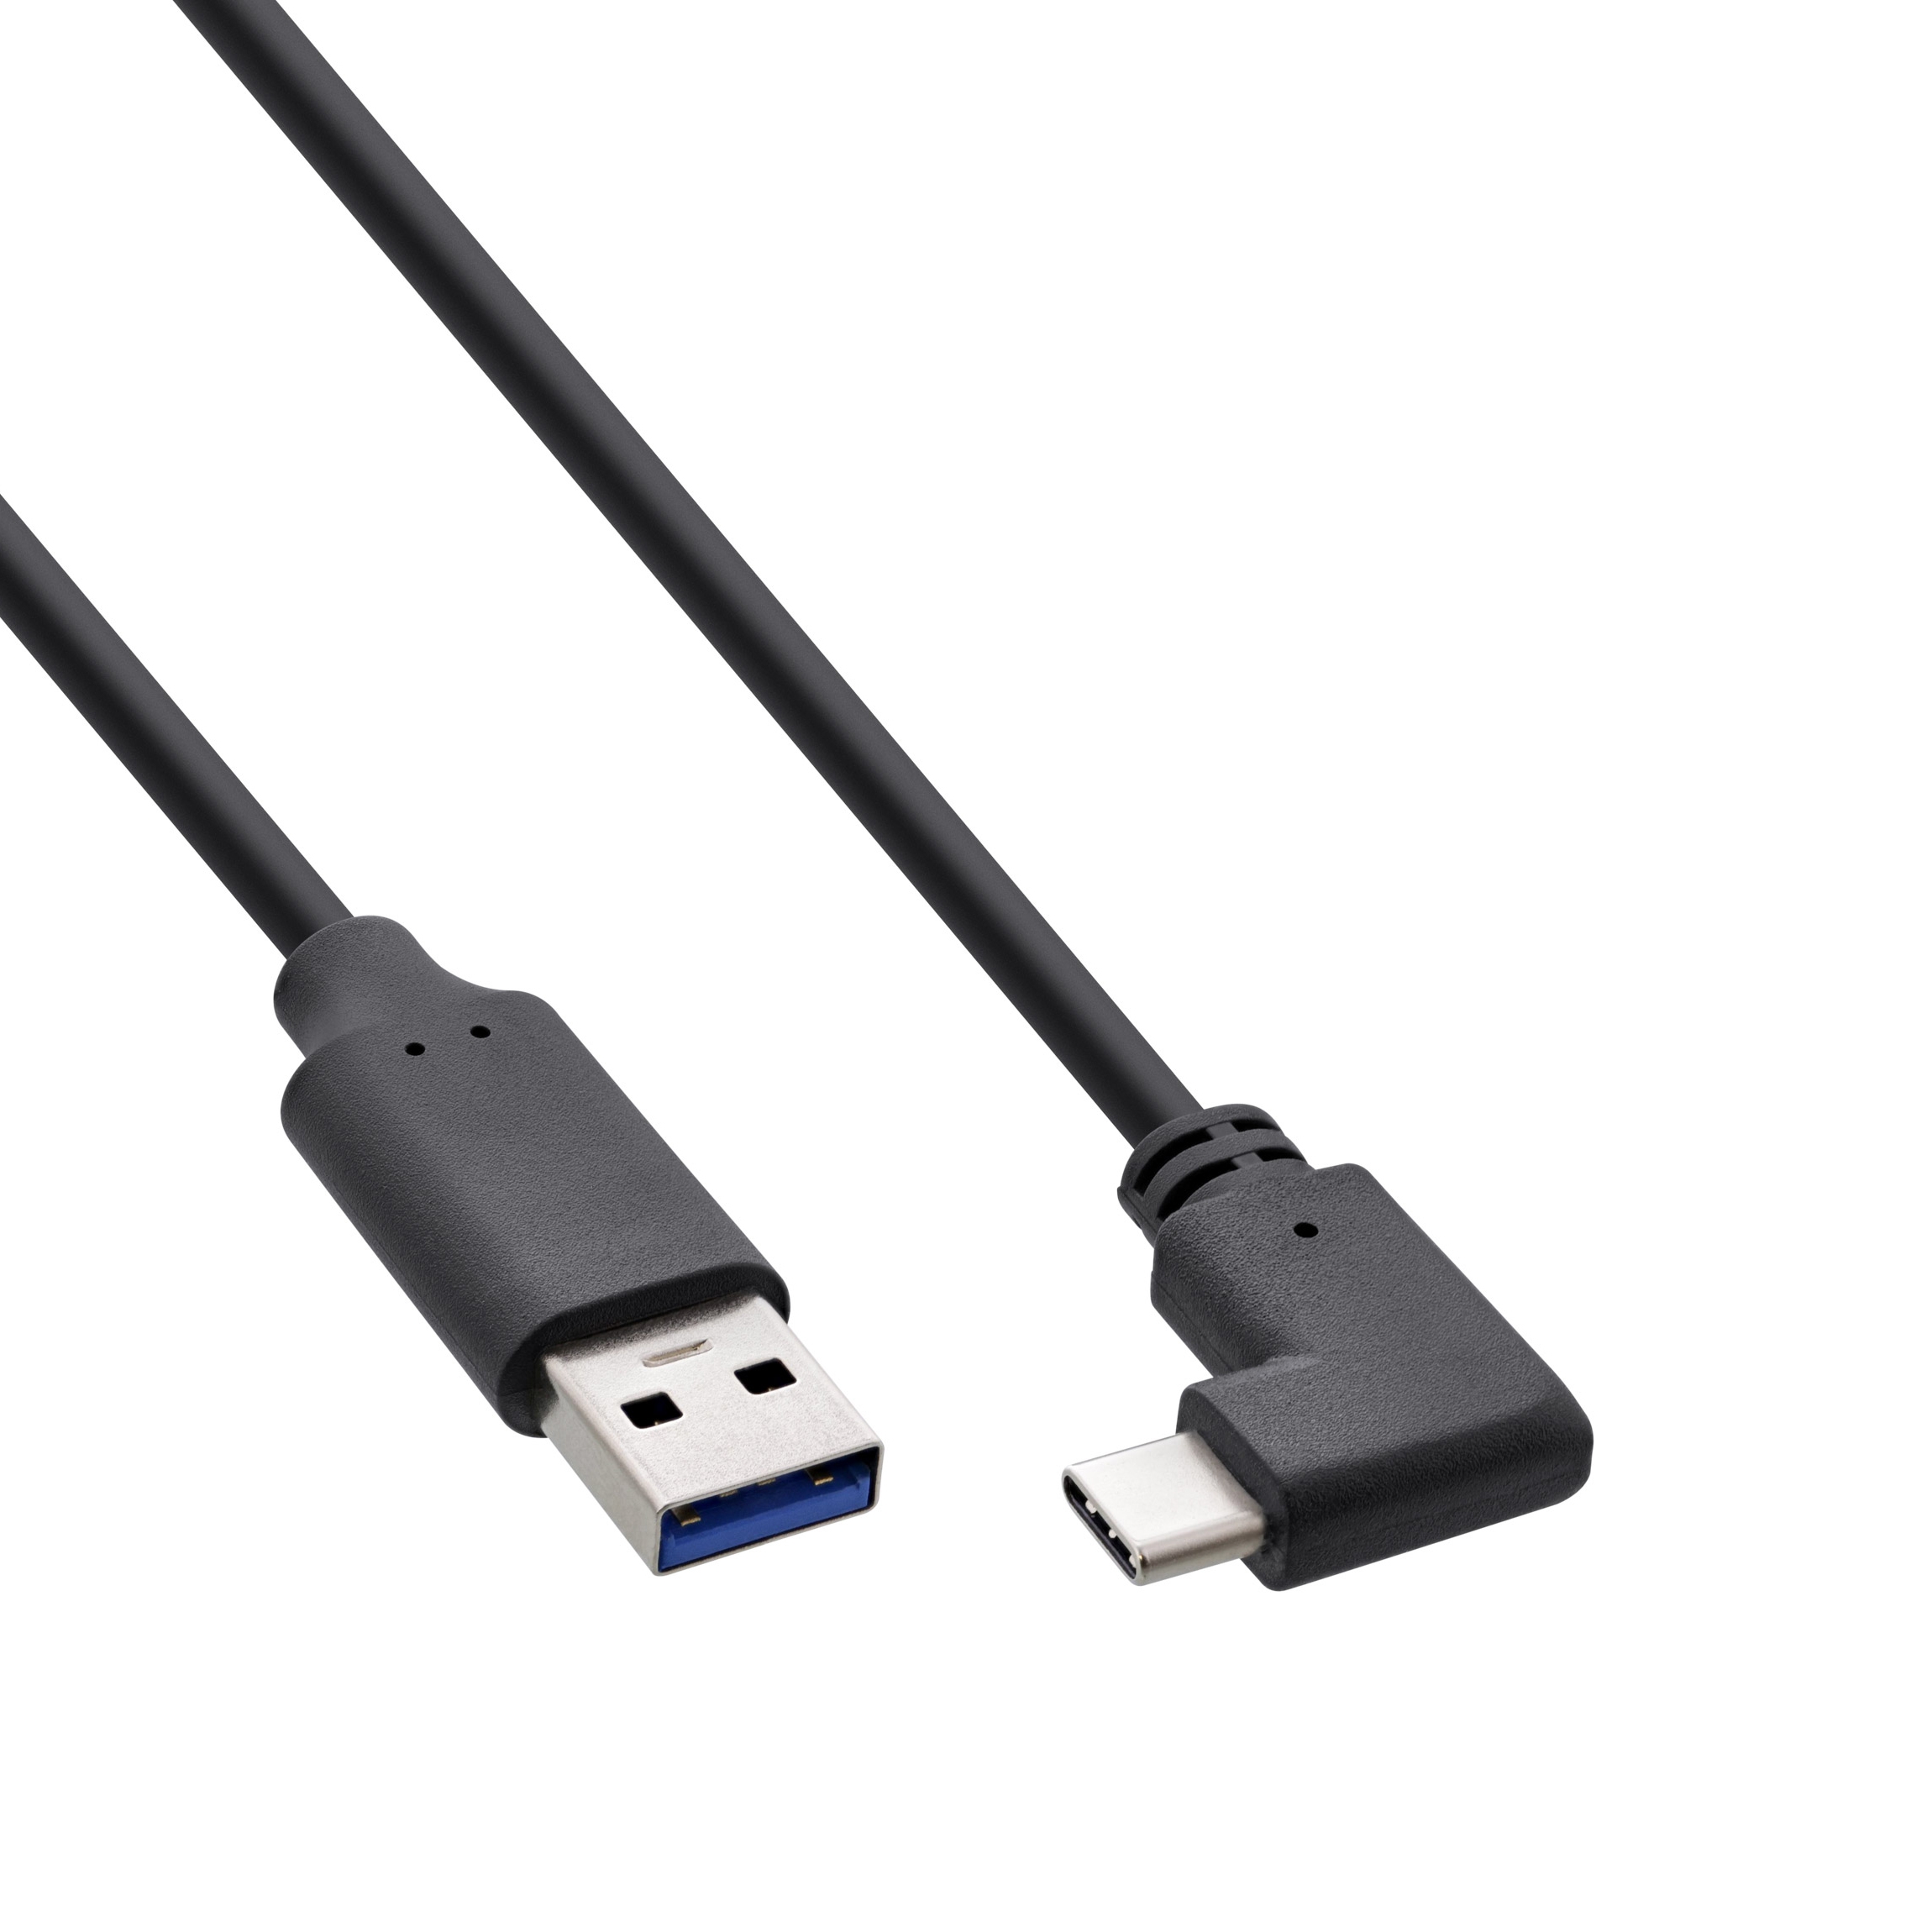 Cable USB Type-C™ male angled to USB 3.0 A male 30cm